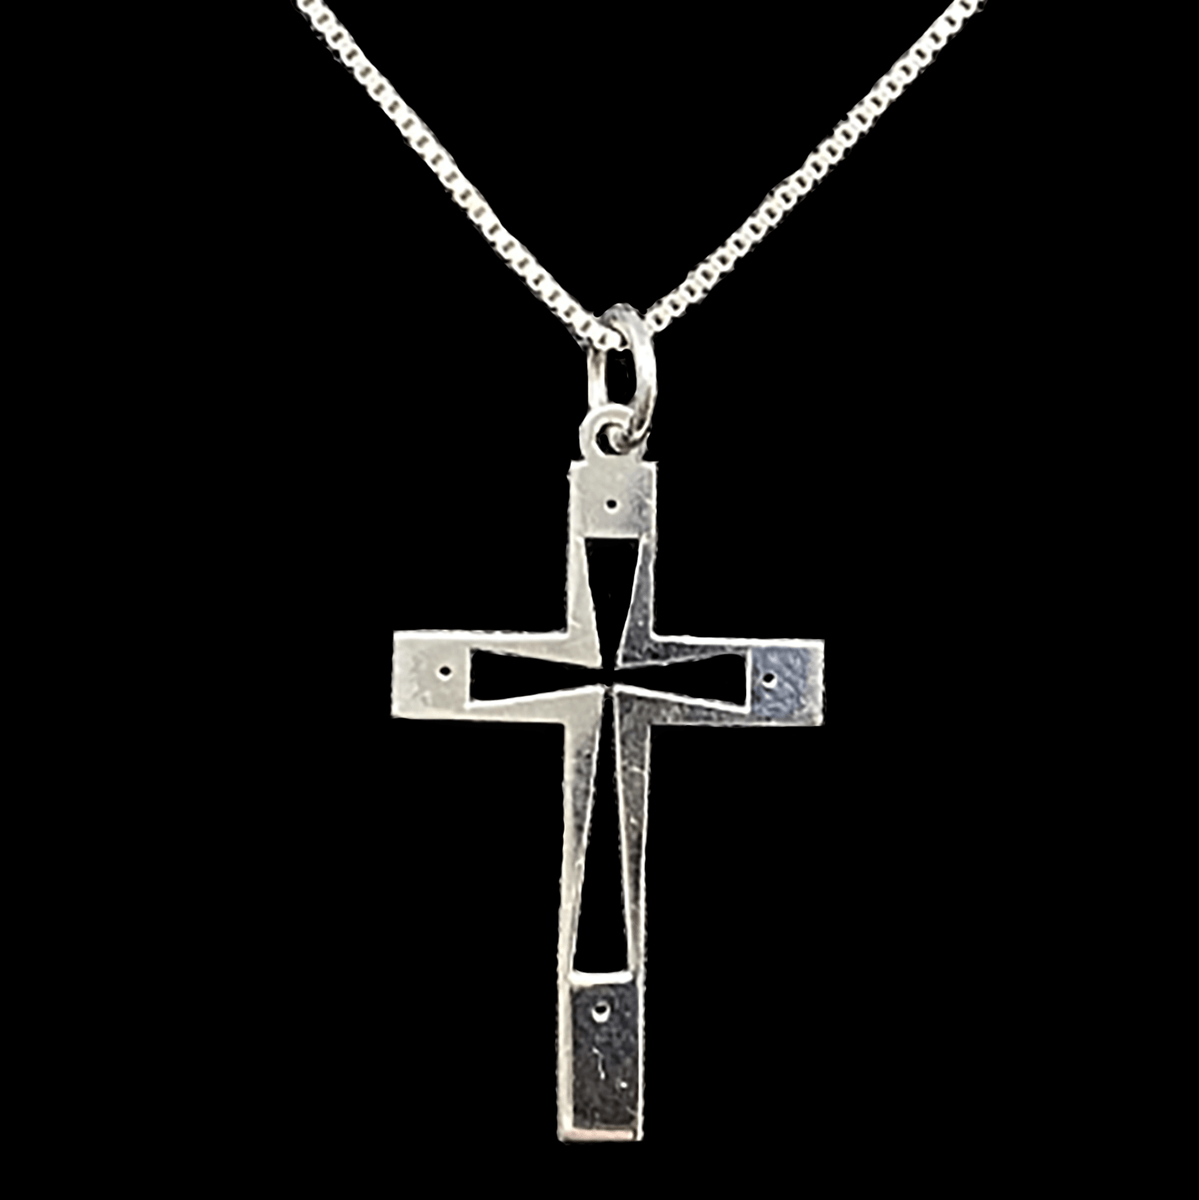 Great Lakes Boutique Silver Necklace with Cross Pendant